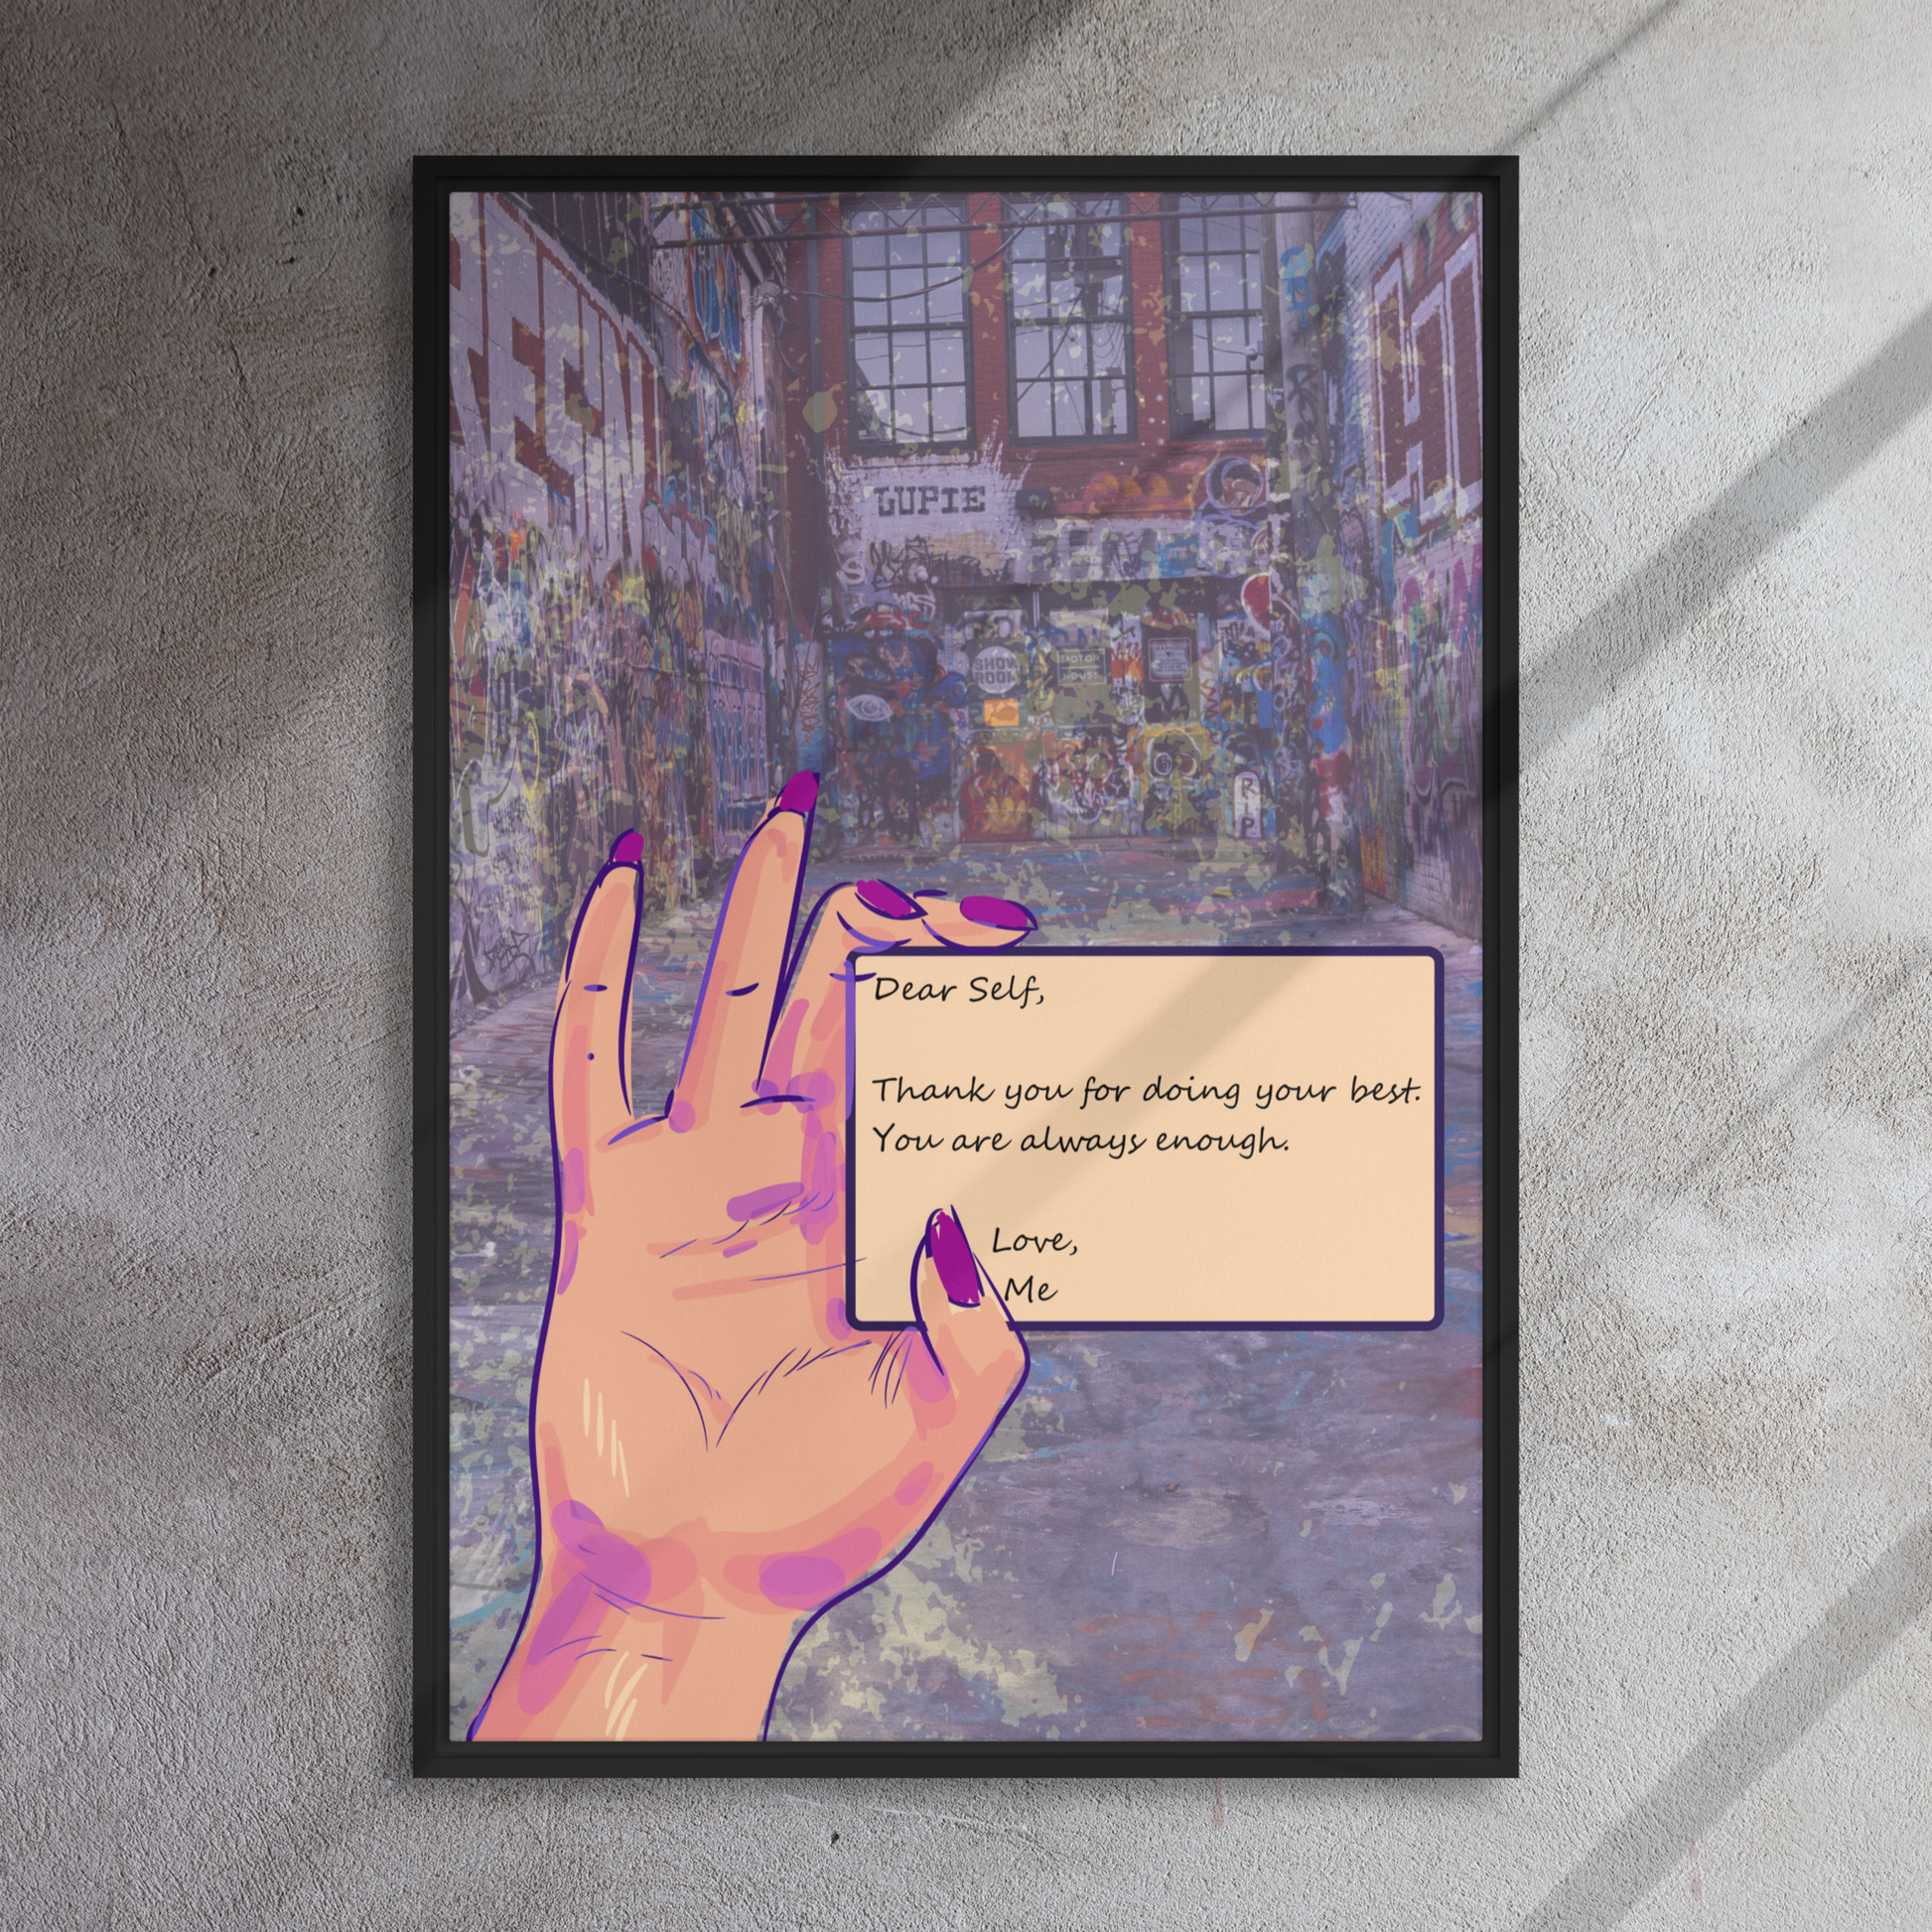 A poster showing a woman's hand holding a piece of Empowering 'Self Love Letter' Mixed Media Graffiti Art, radiating self love and empowerment.